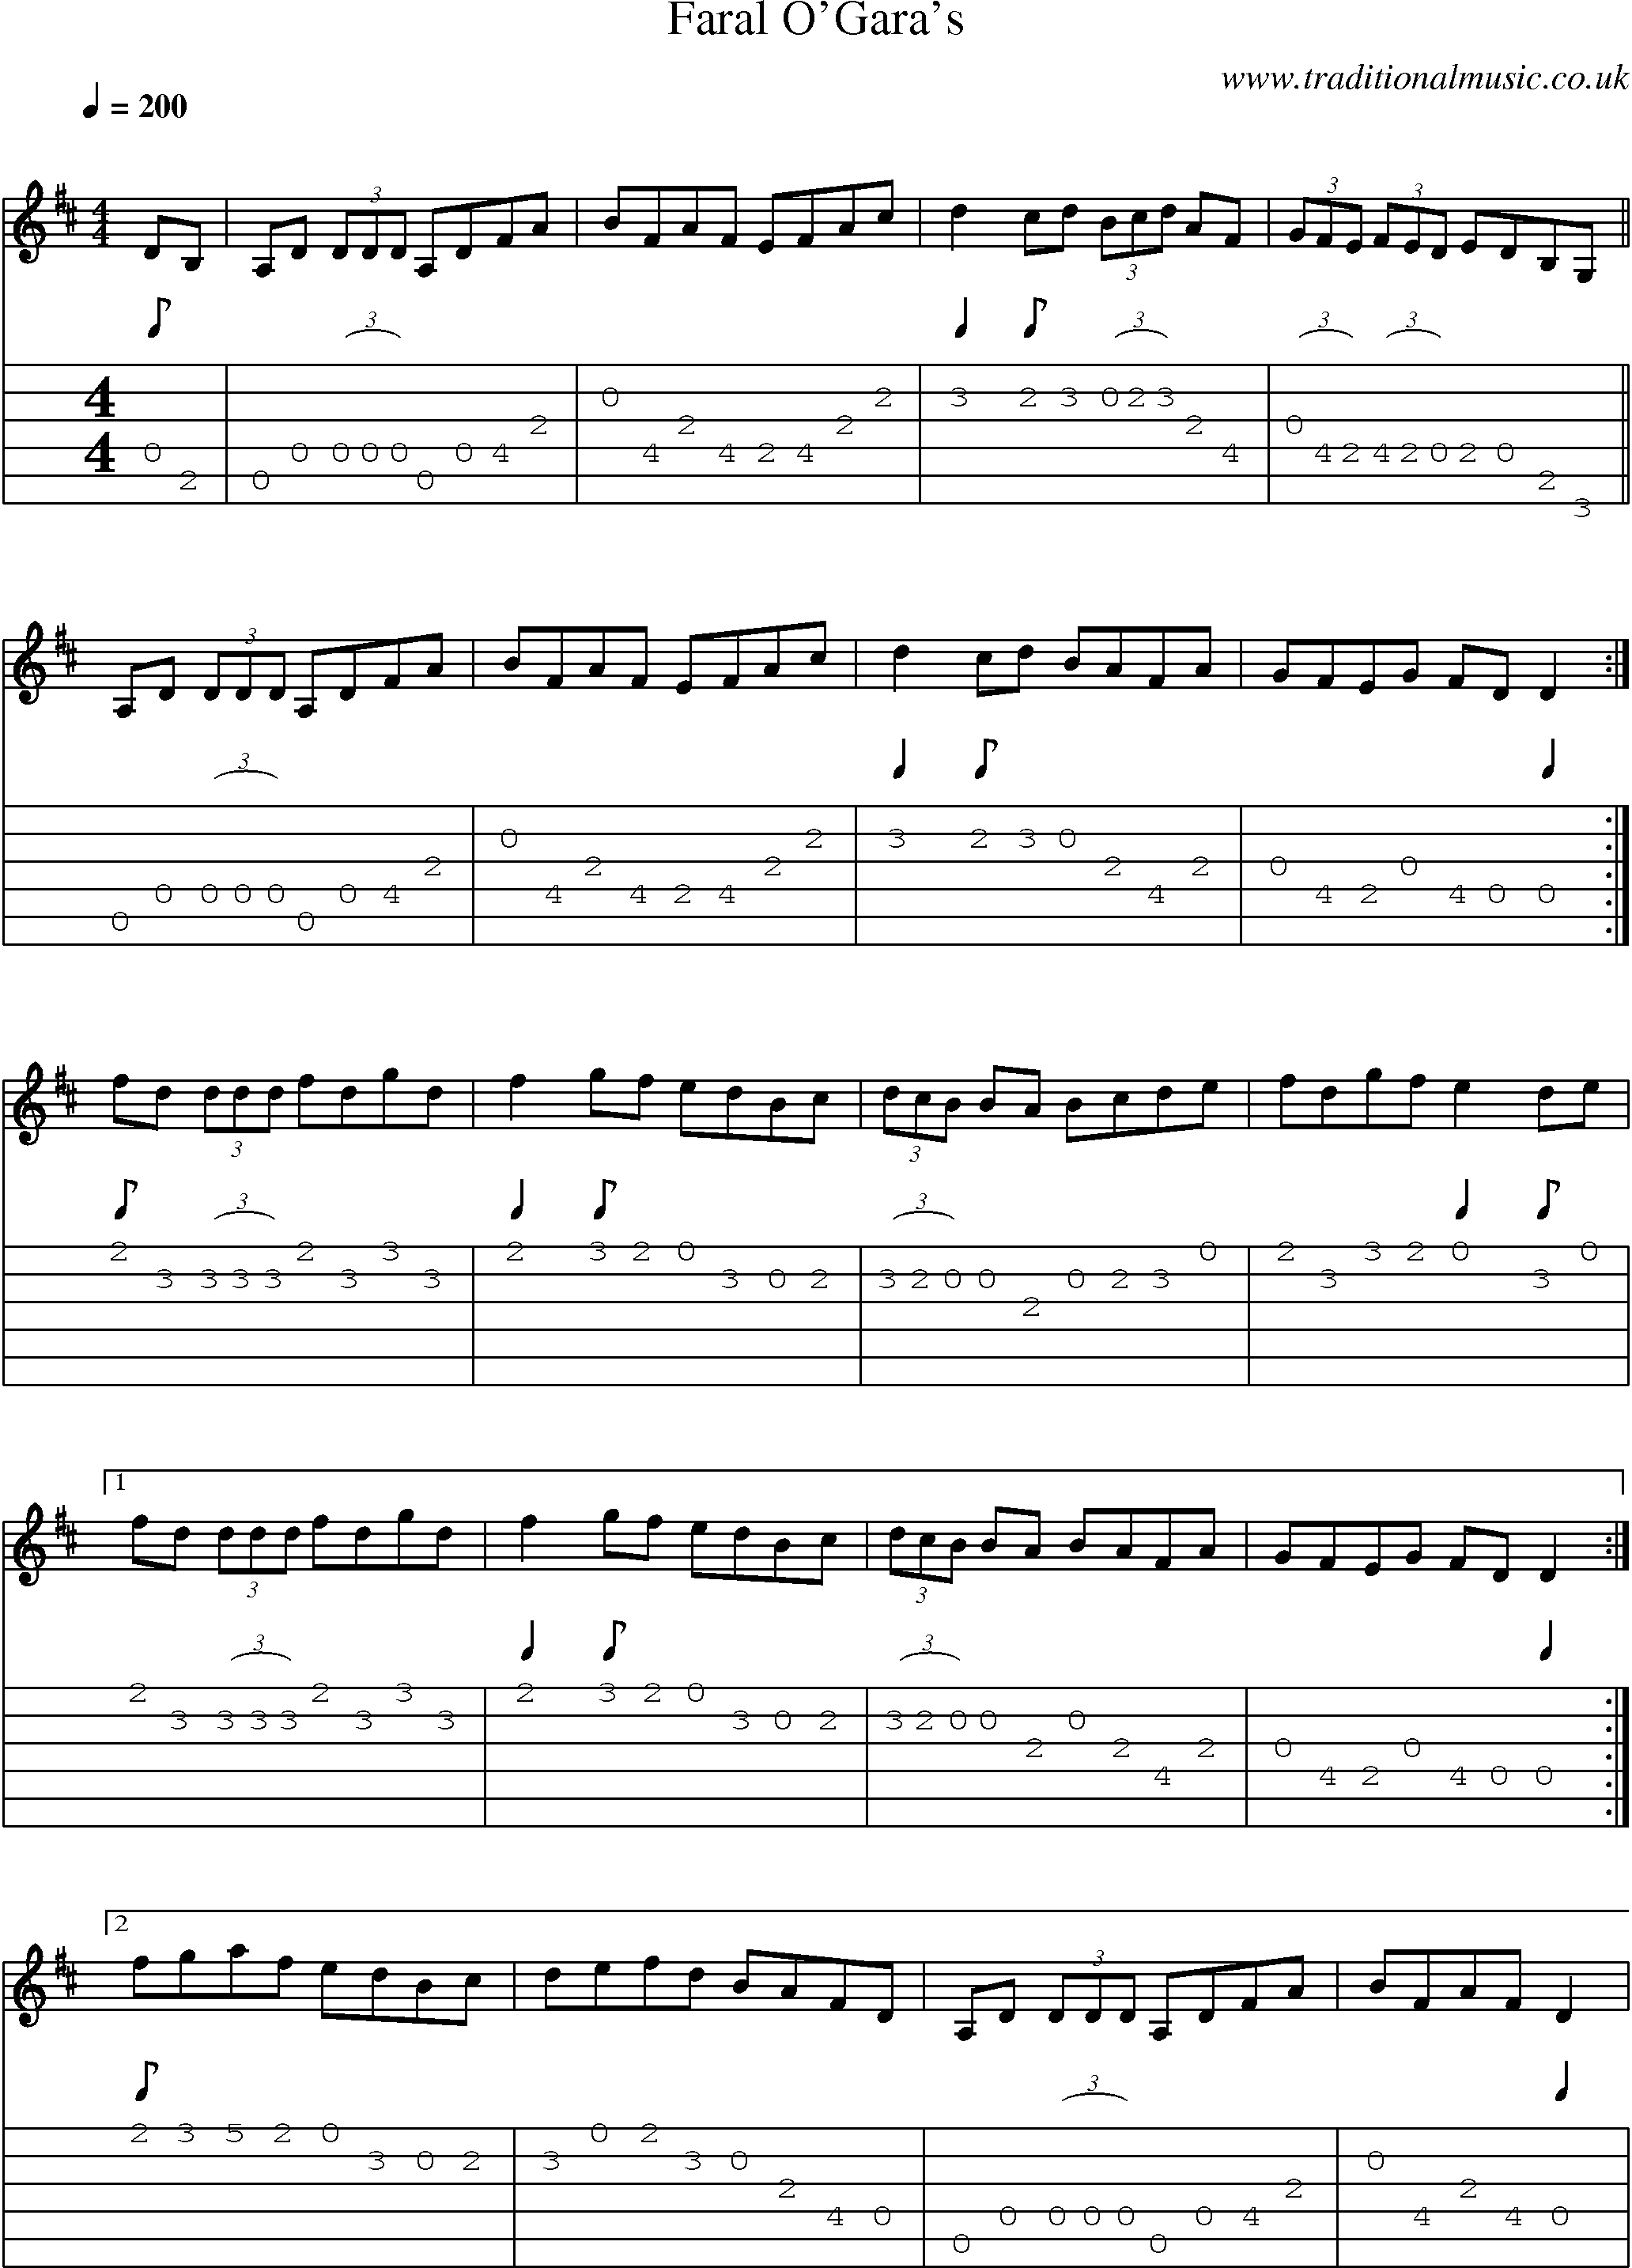 Music Score and Guitar Tabs for Faral Ogaras